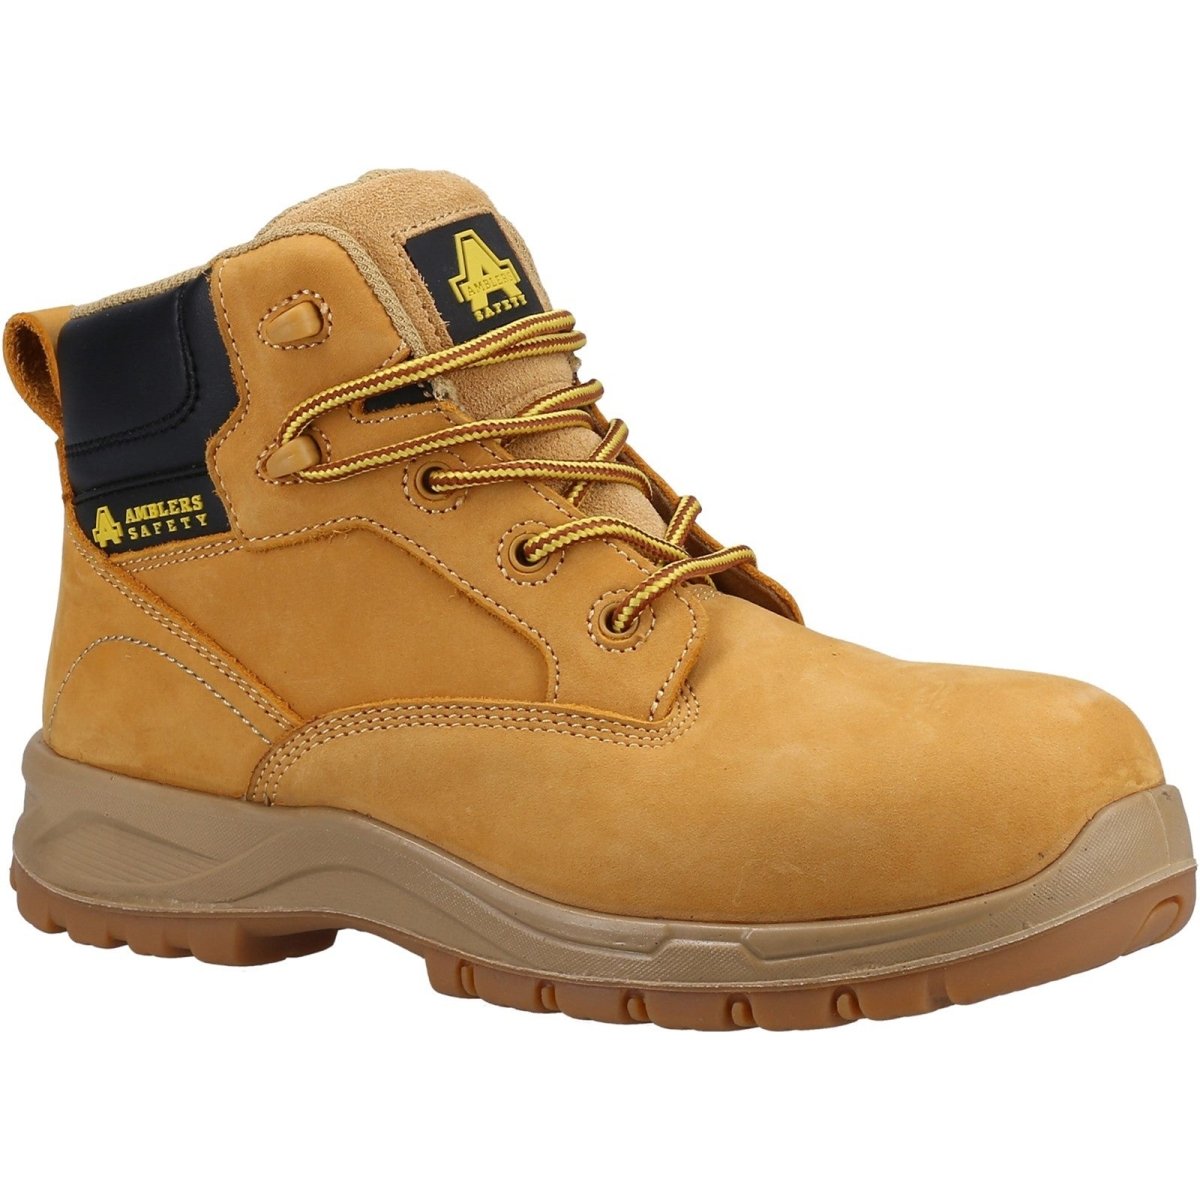 Amblers AS605C KIRA S3 Waterproof Safety Boots - Shoe Store Direct